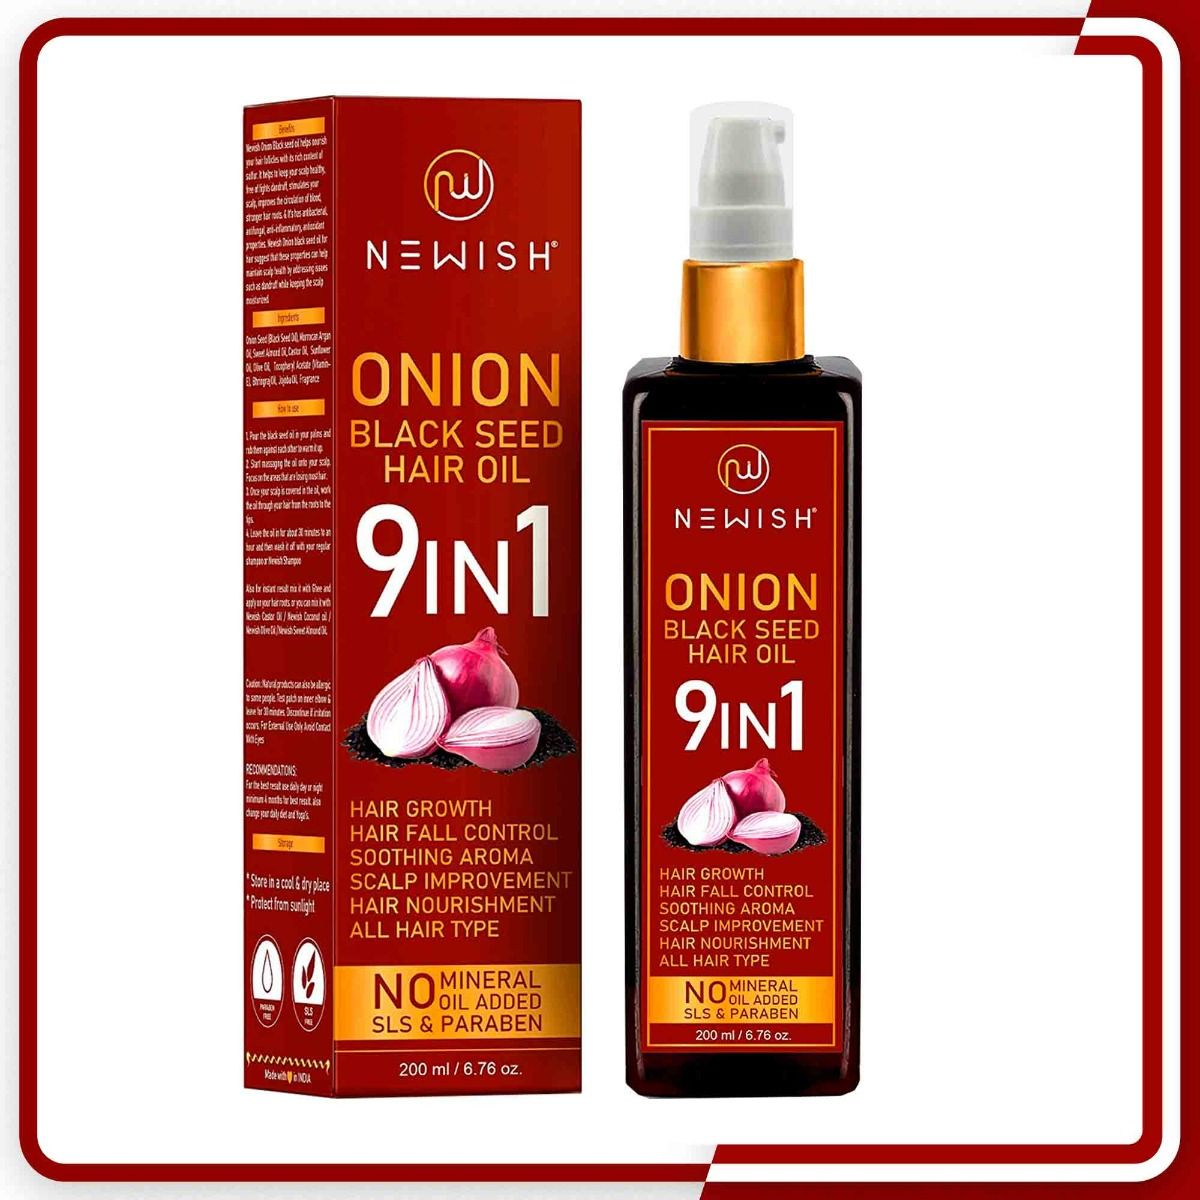 Newish 9 in 1 Onion Black Seed Hair Oil, 200 ml Price, Uses, Side Effects,  Composition - Apollo Pharmacy